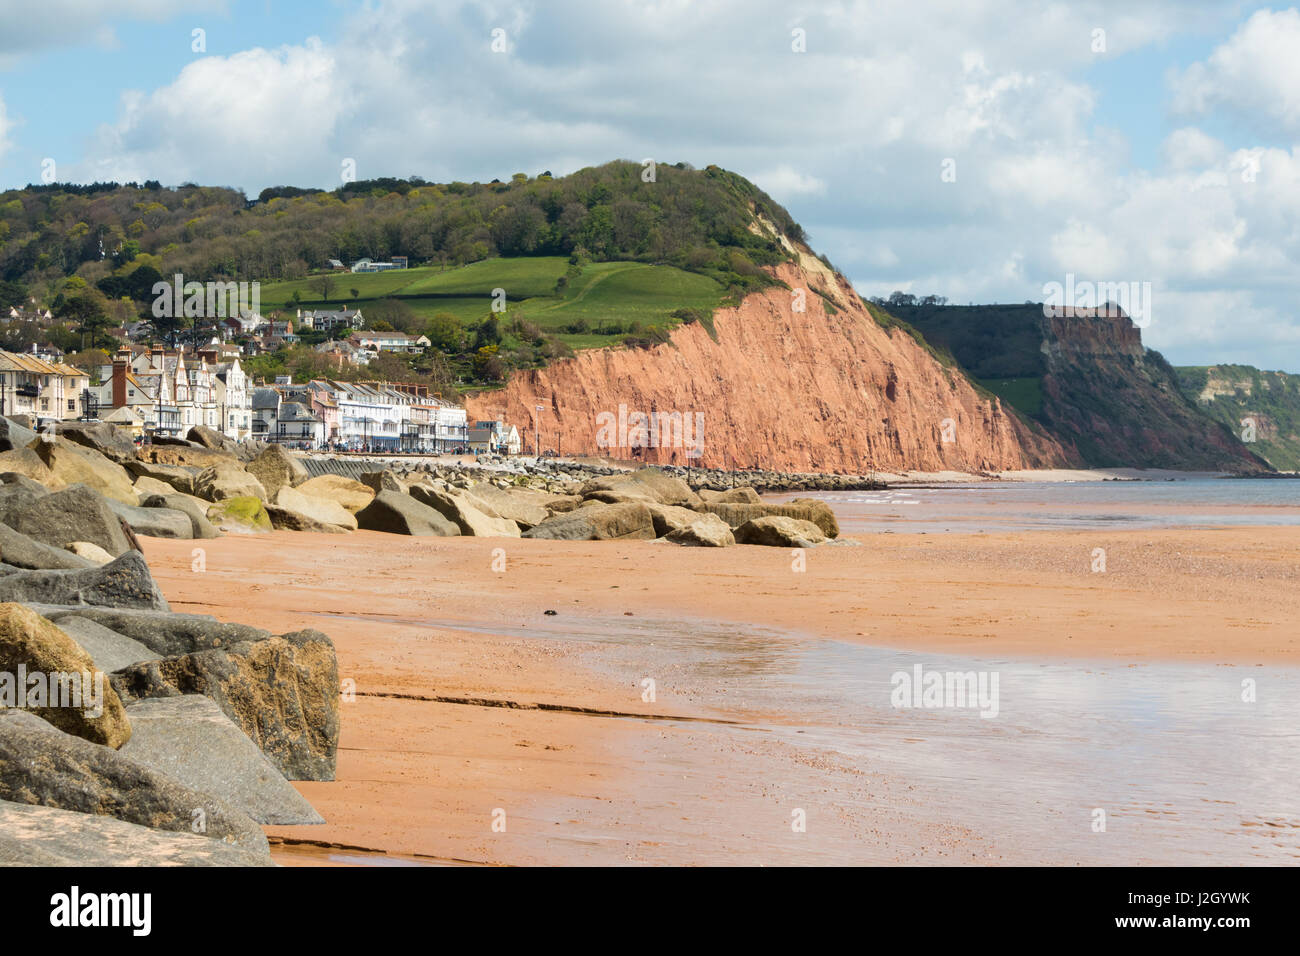 Views of Sidmouth beaches and town, including the cliffs and rocks, architecture, buildings, Jacobs Ladder, pebble beaches and sea. Stock Photo